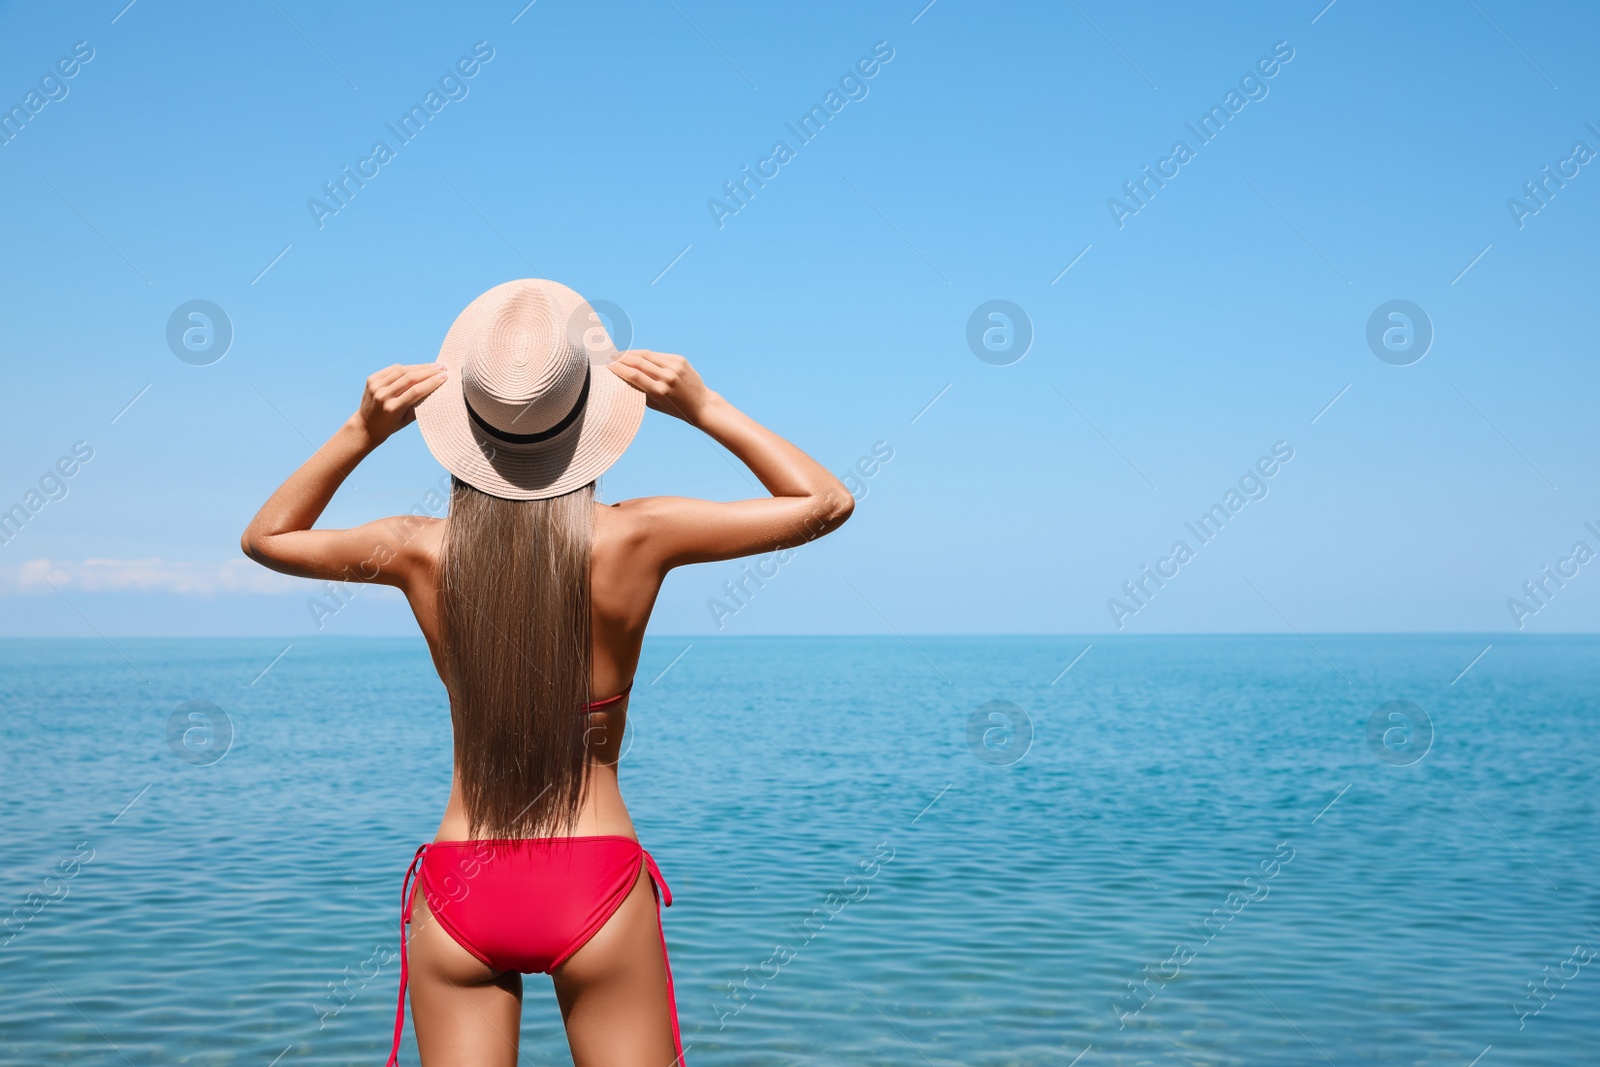 Photo of Sexy young woman in stylish bikini and straw hat on seashore, back view. Space for text